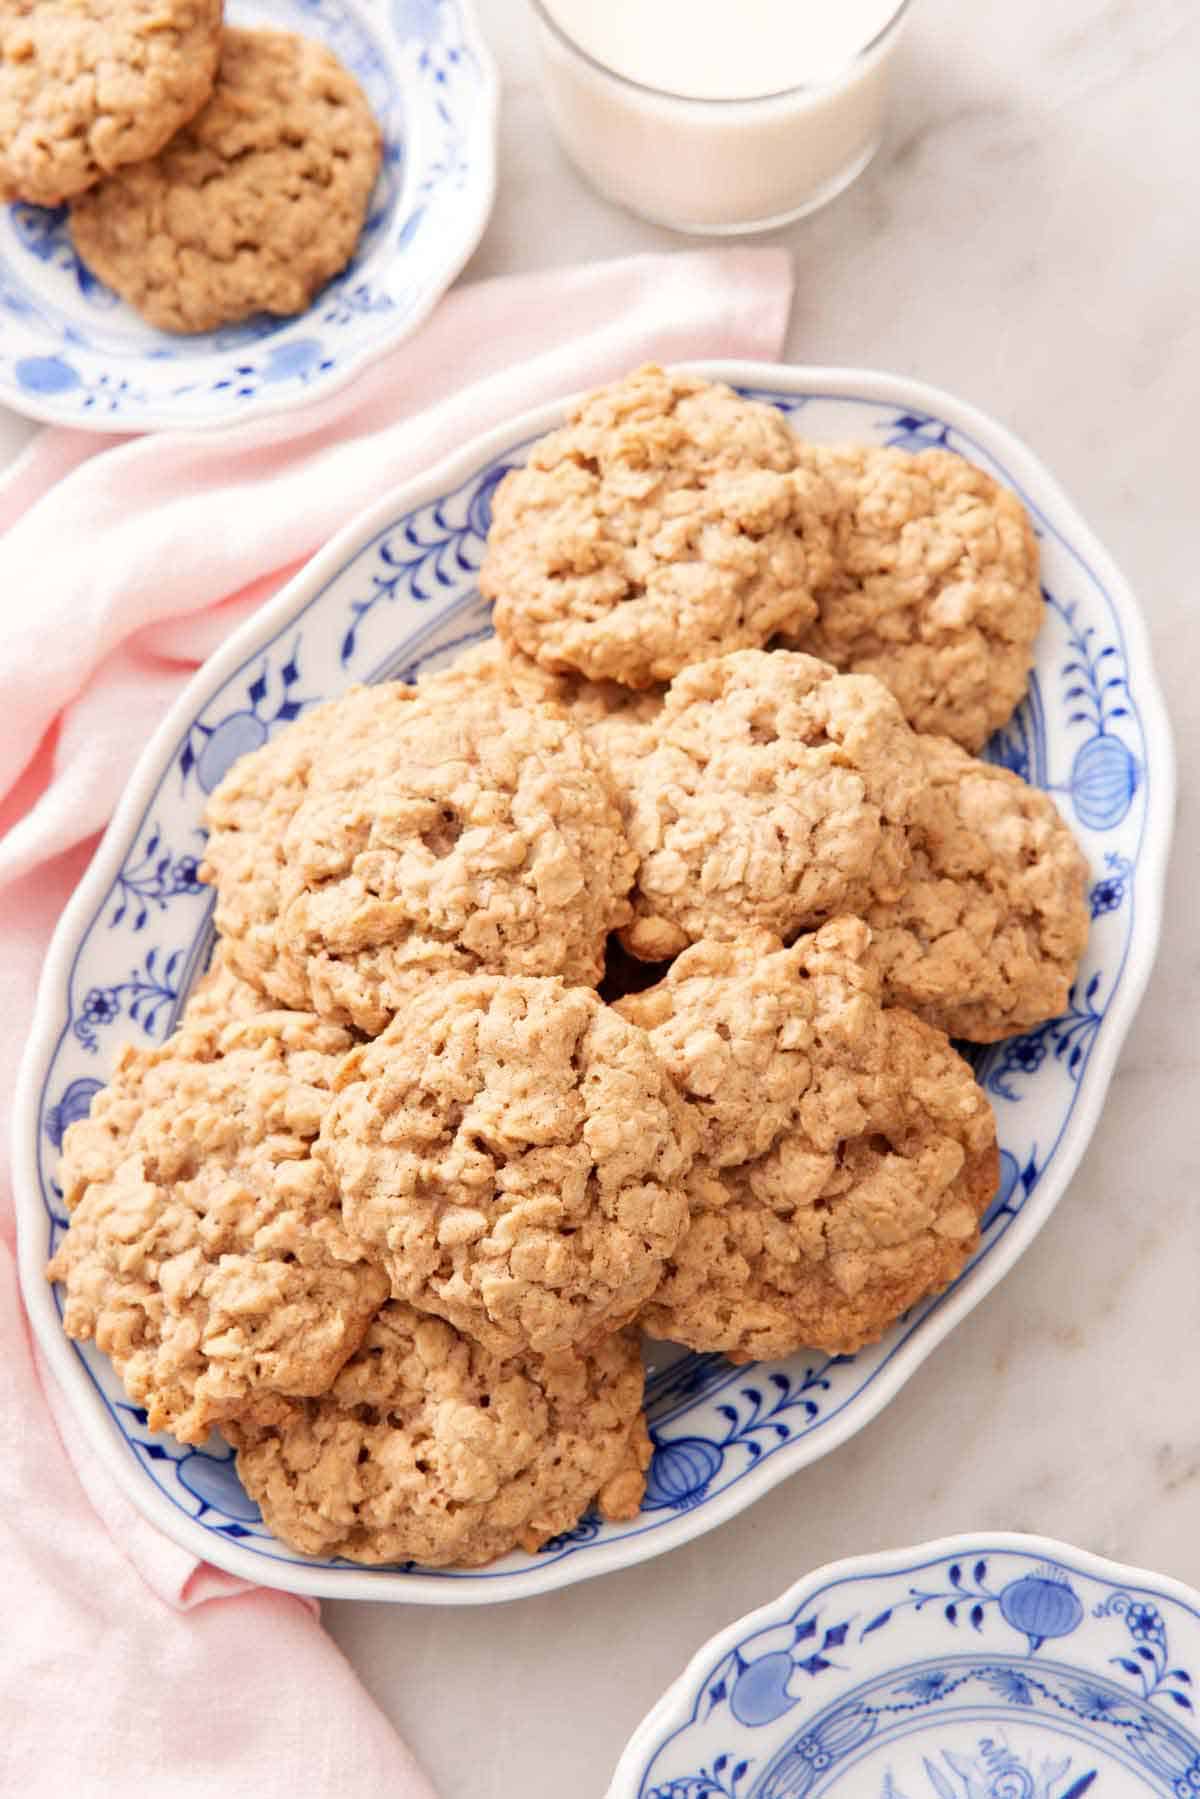 A platter of oatmeal cookies with more on a plate on the side with a glass of milk.